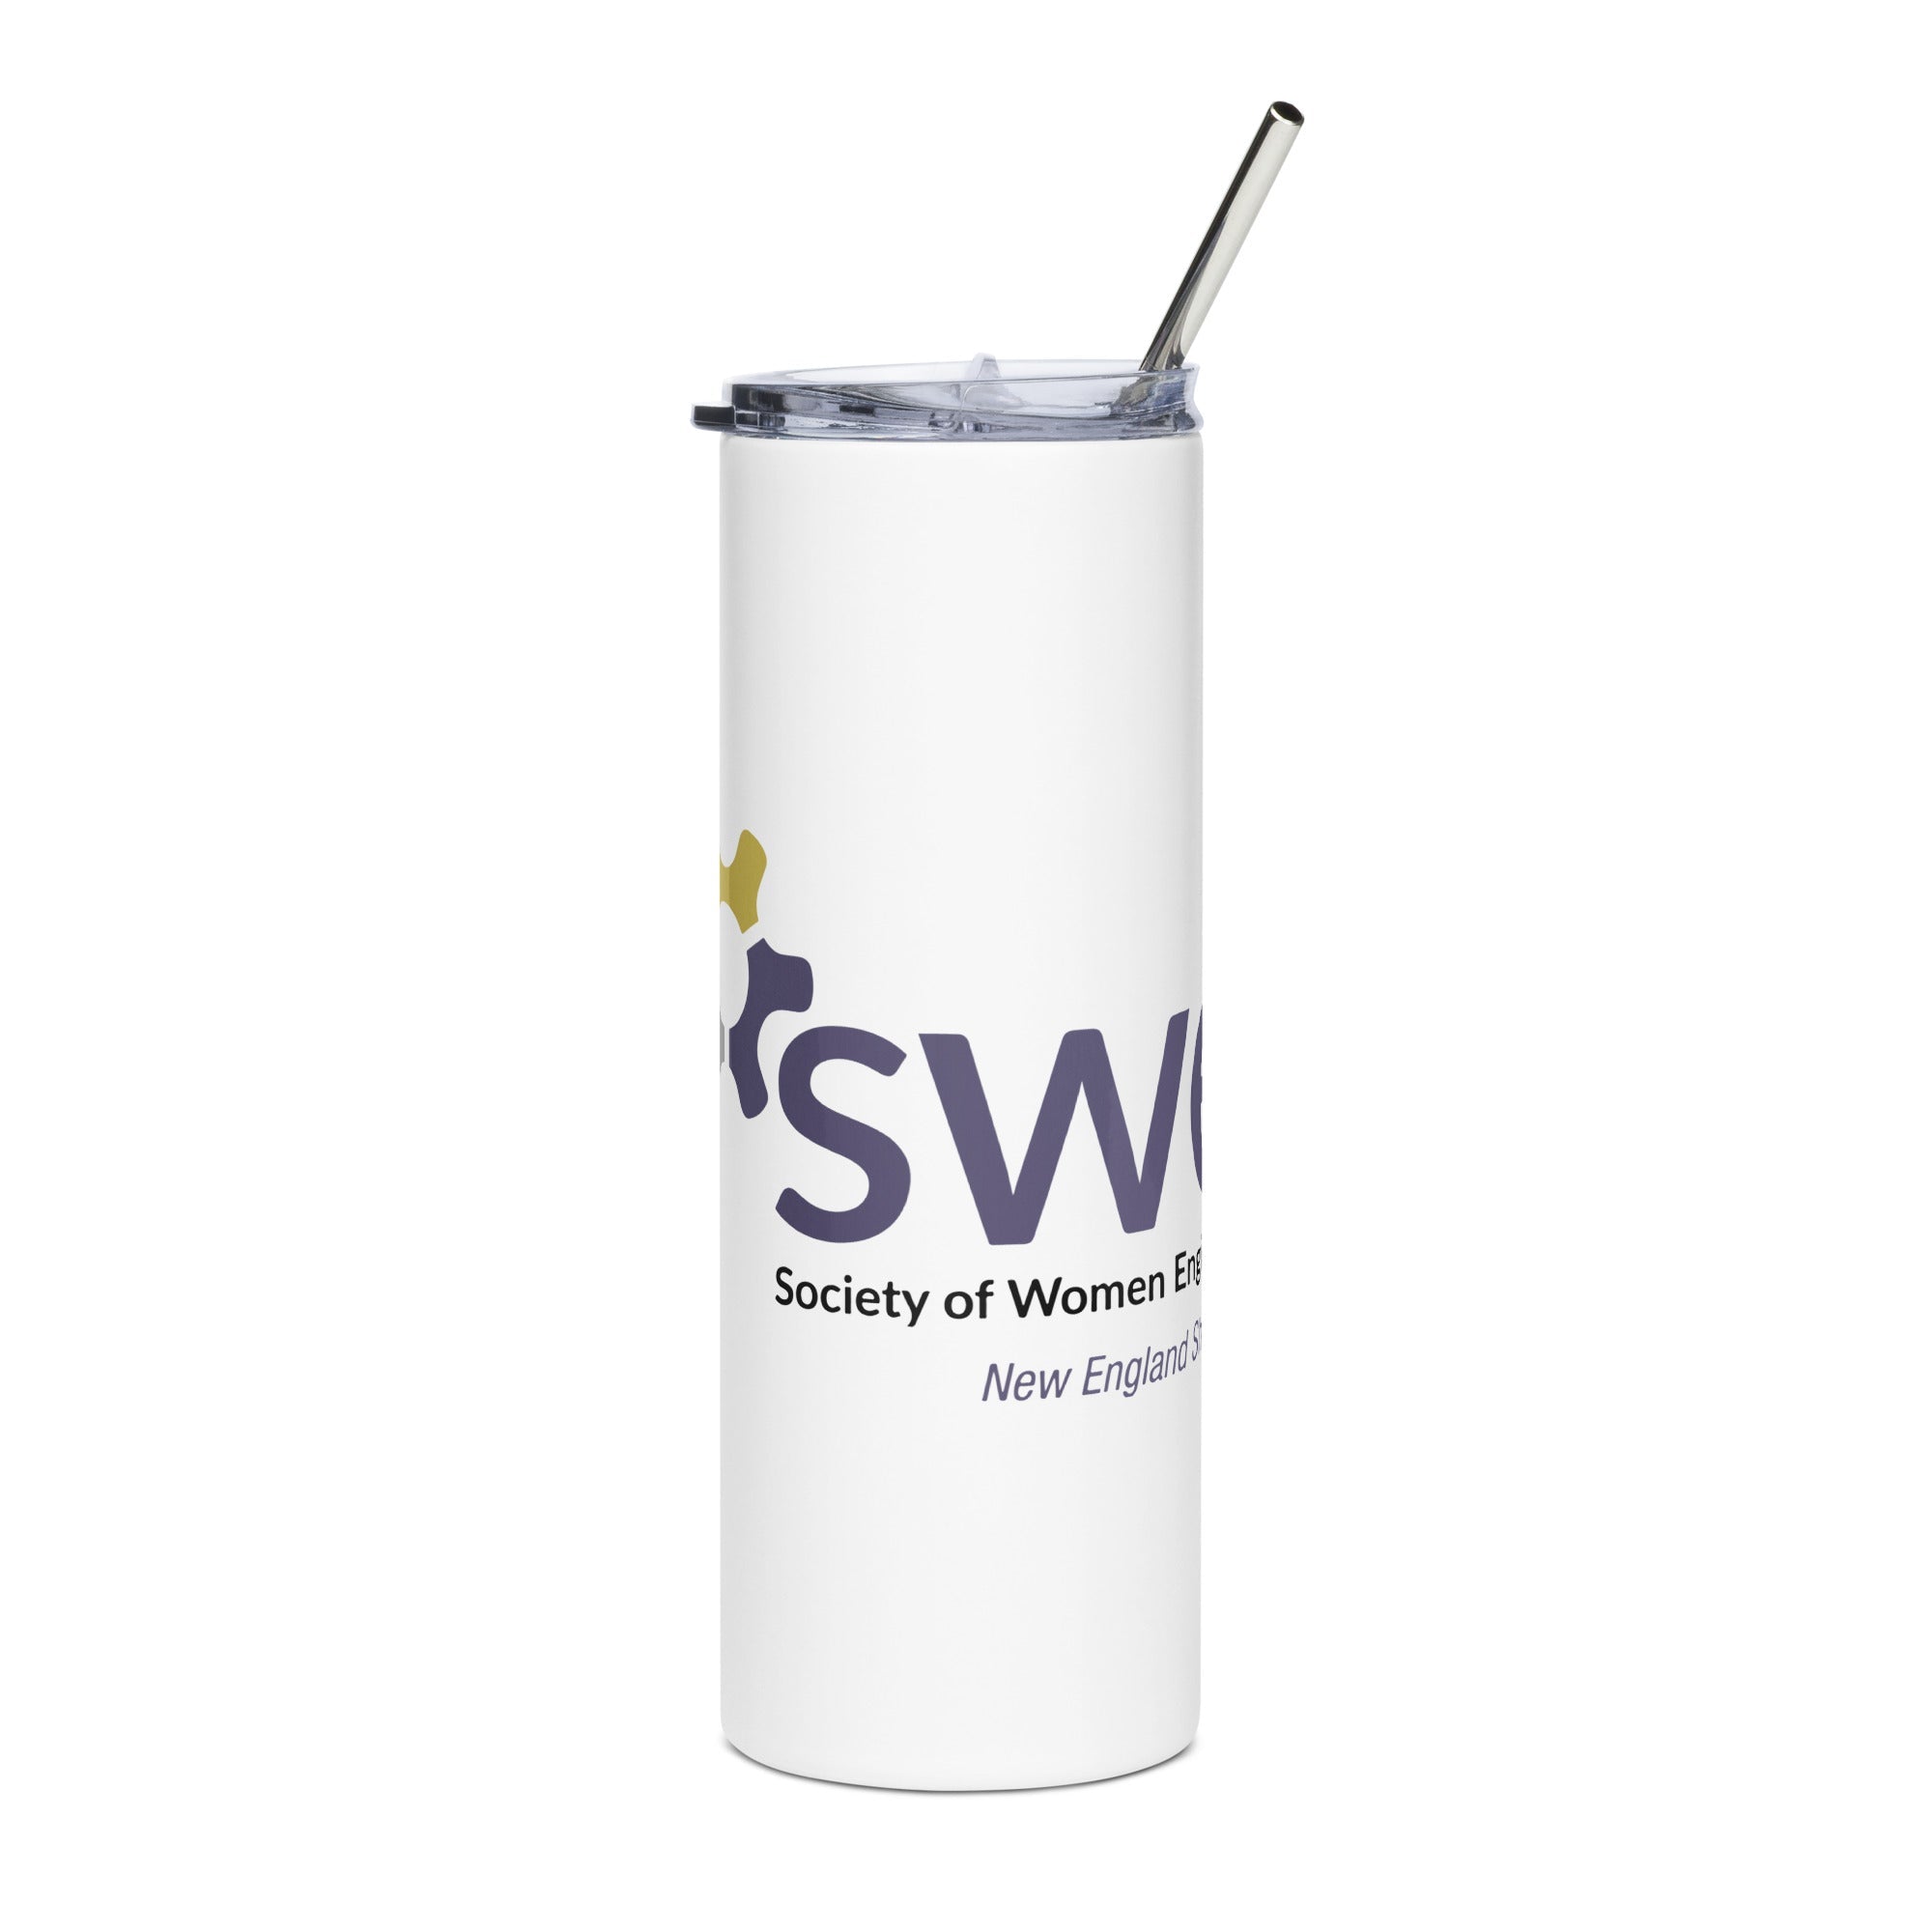 SWE NESS Stainless steel tumbler